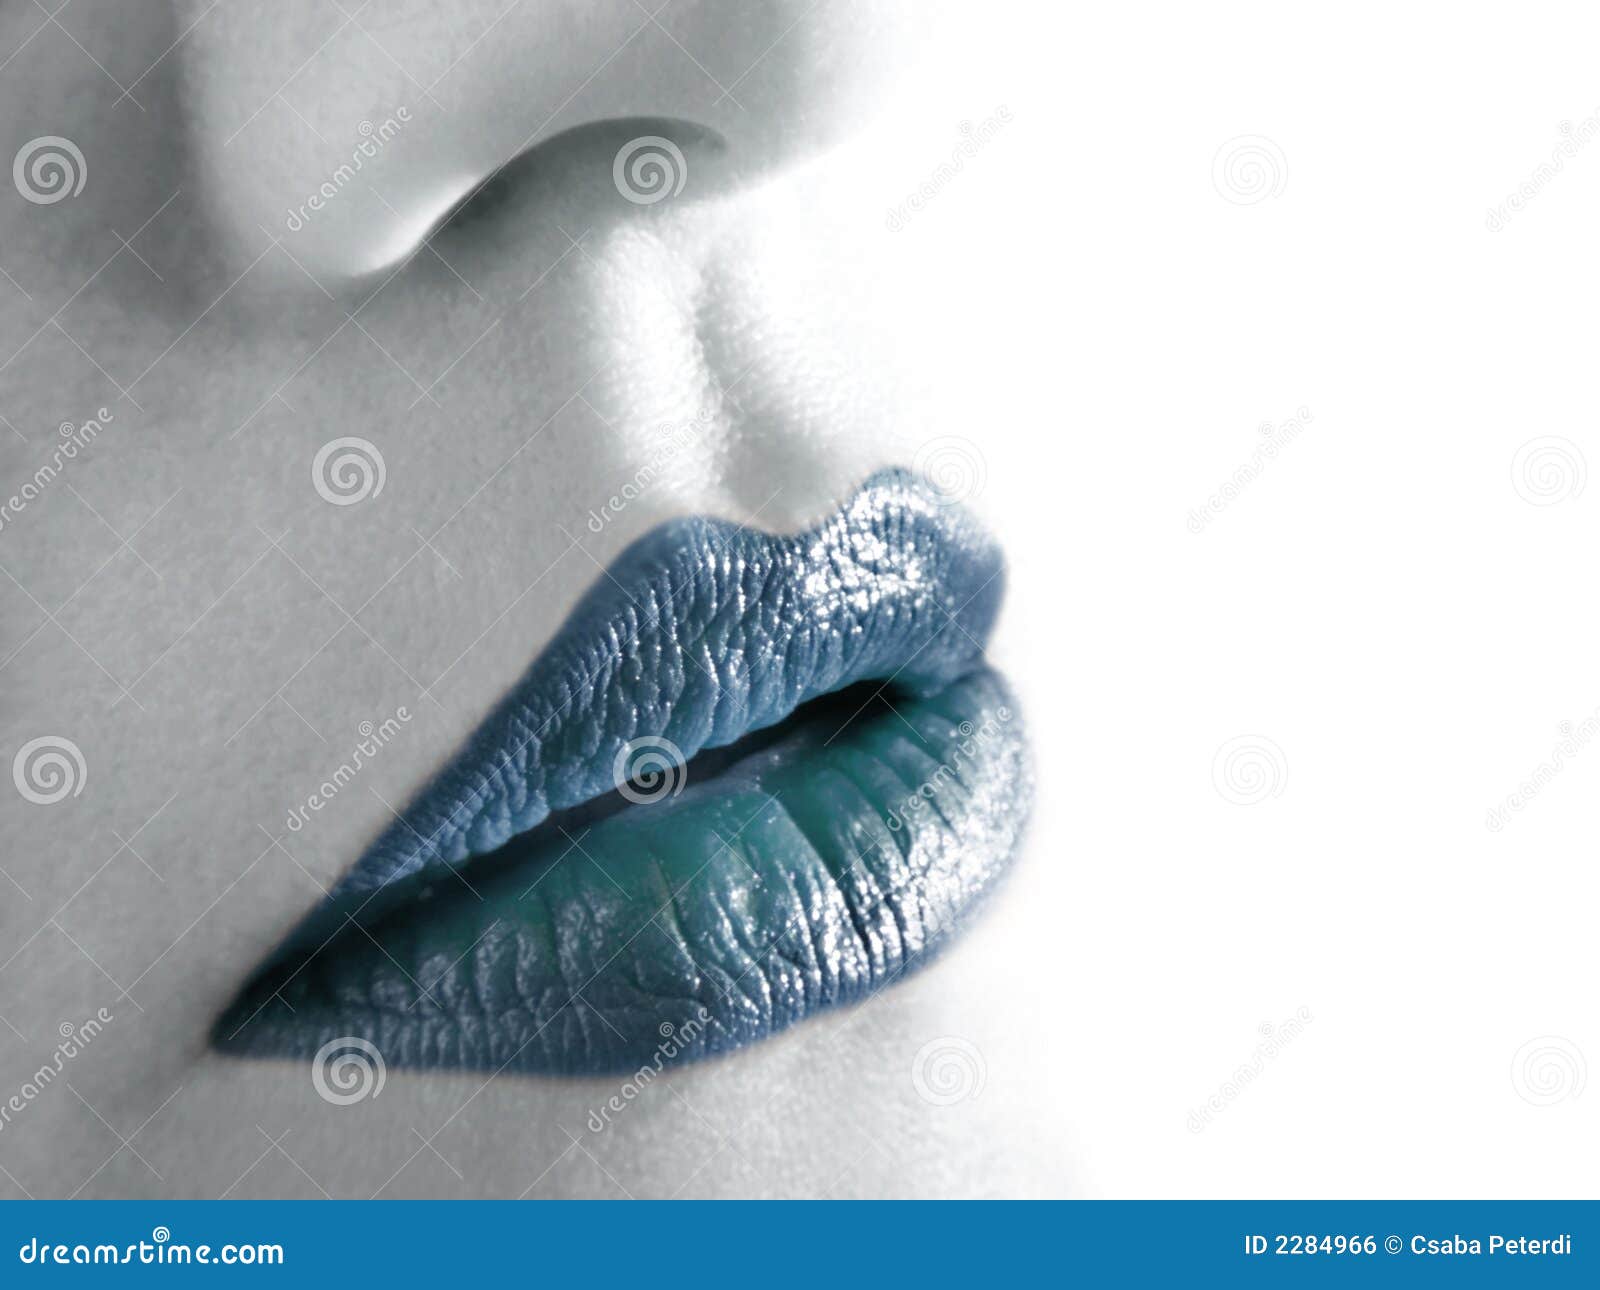 445 Wax Lips Stock Photos - Free & Royalty-Free Stock Photos from Dreamstime